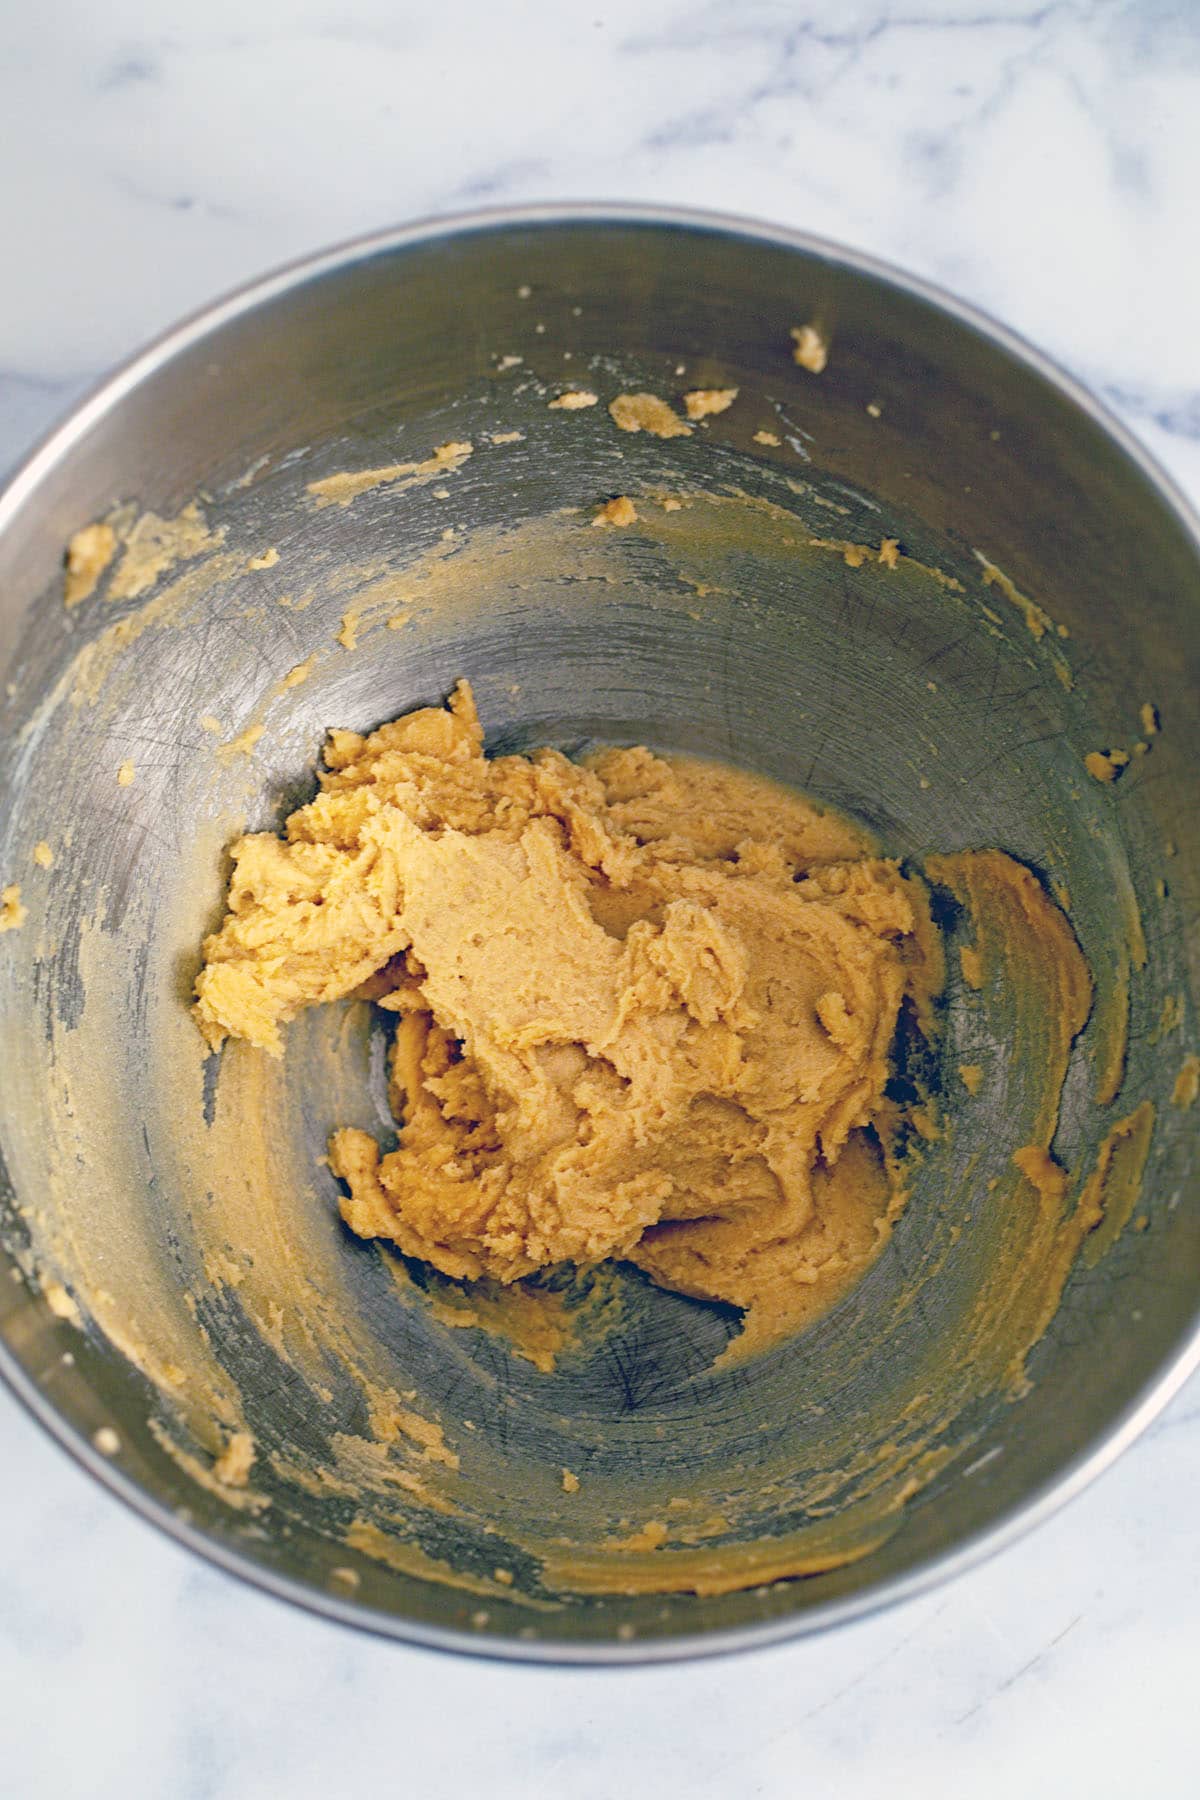 Butter and brown sugar creamed together in mixing bowl.